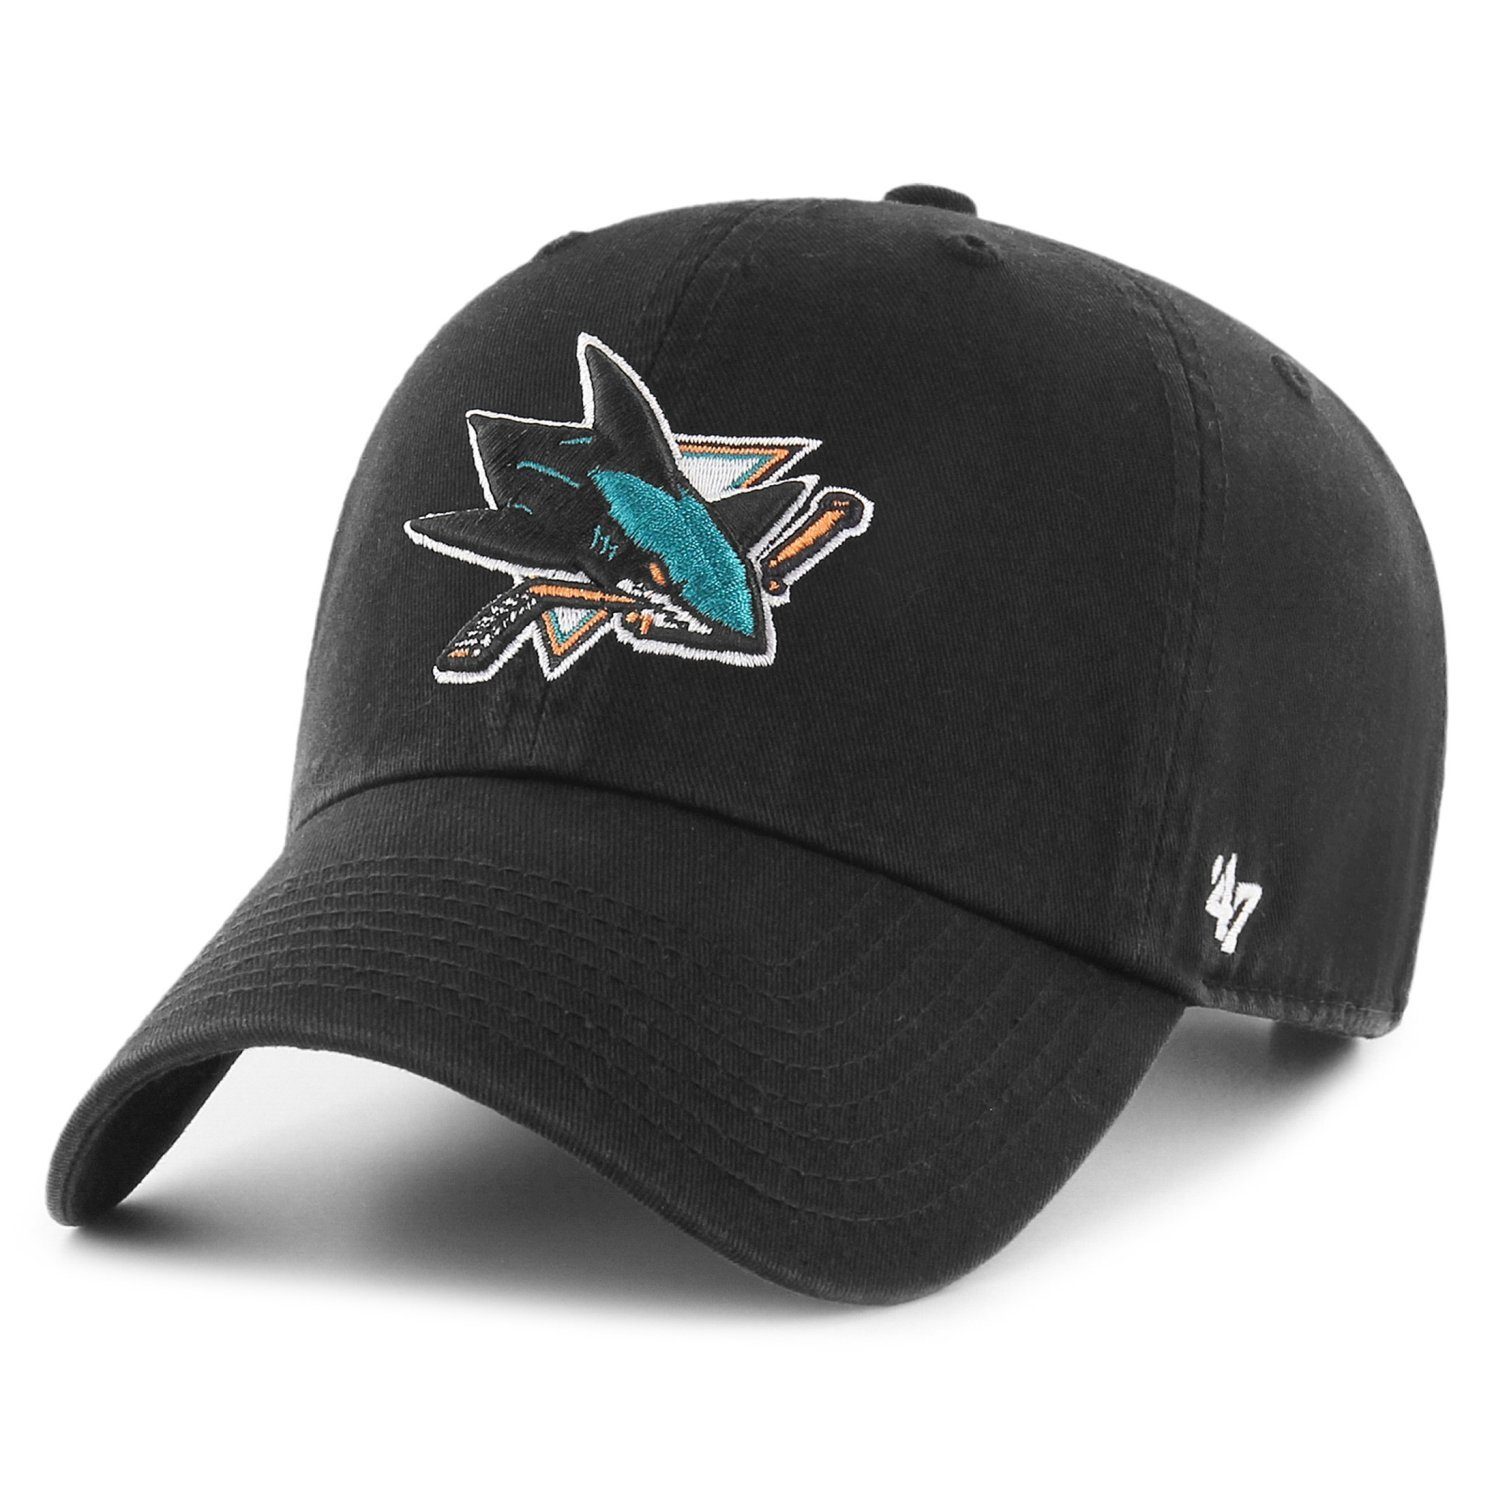 Sharks Brand Jose Relaxed CLEAN Trucker Fit Cap UP '47 San